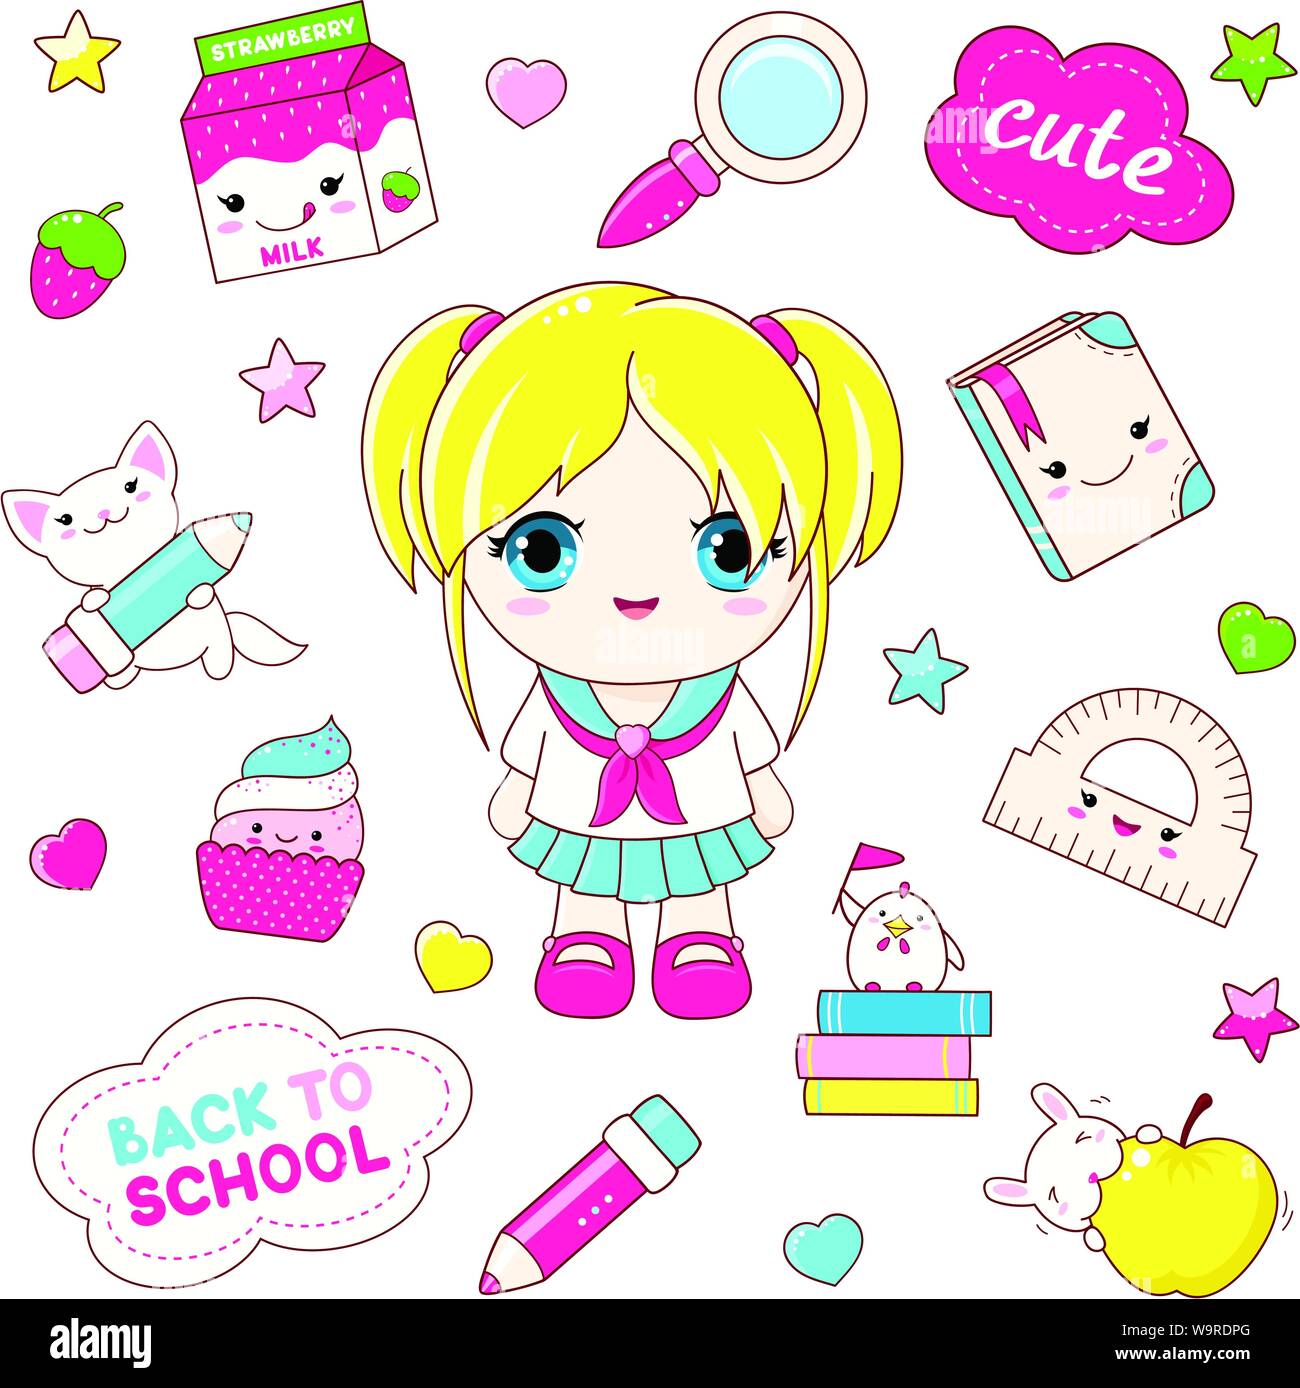 https://c8.alamy.com/comp/W9RDPG/back-to-school-vector-set-of-education-icons-in-kawaii-style-little-school-girl-cat-bunny-book-pencil-apple-ruler-package-of-milk-cupcake-c-W9RDPG.jpg